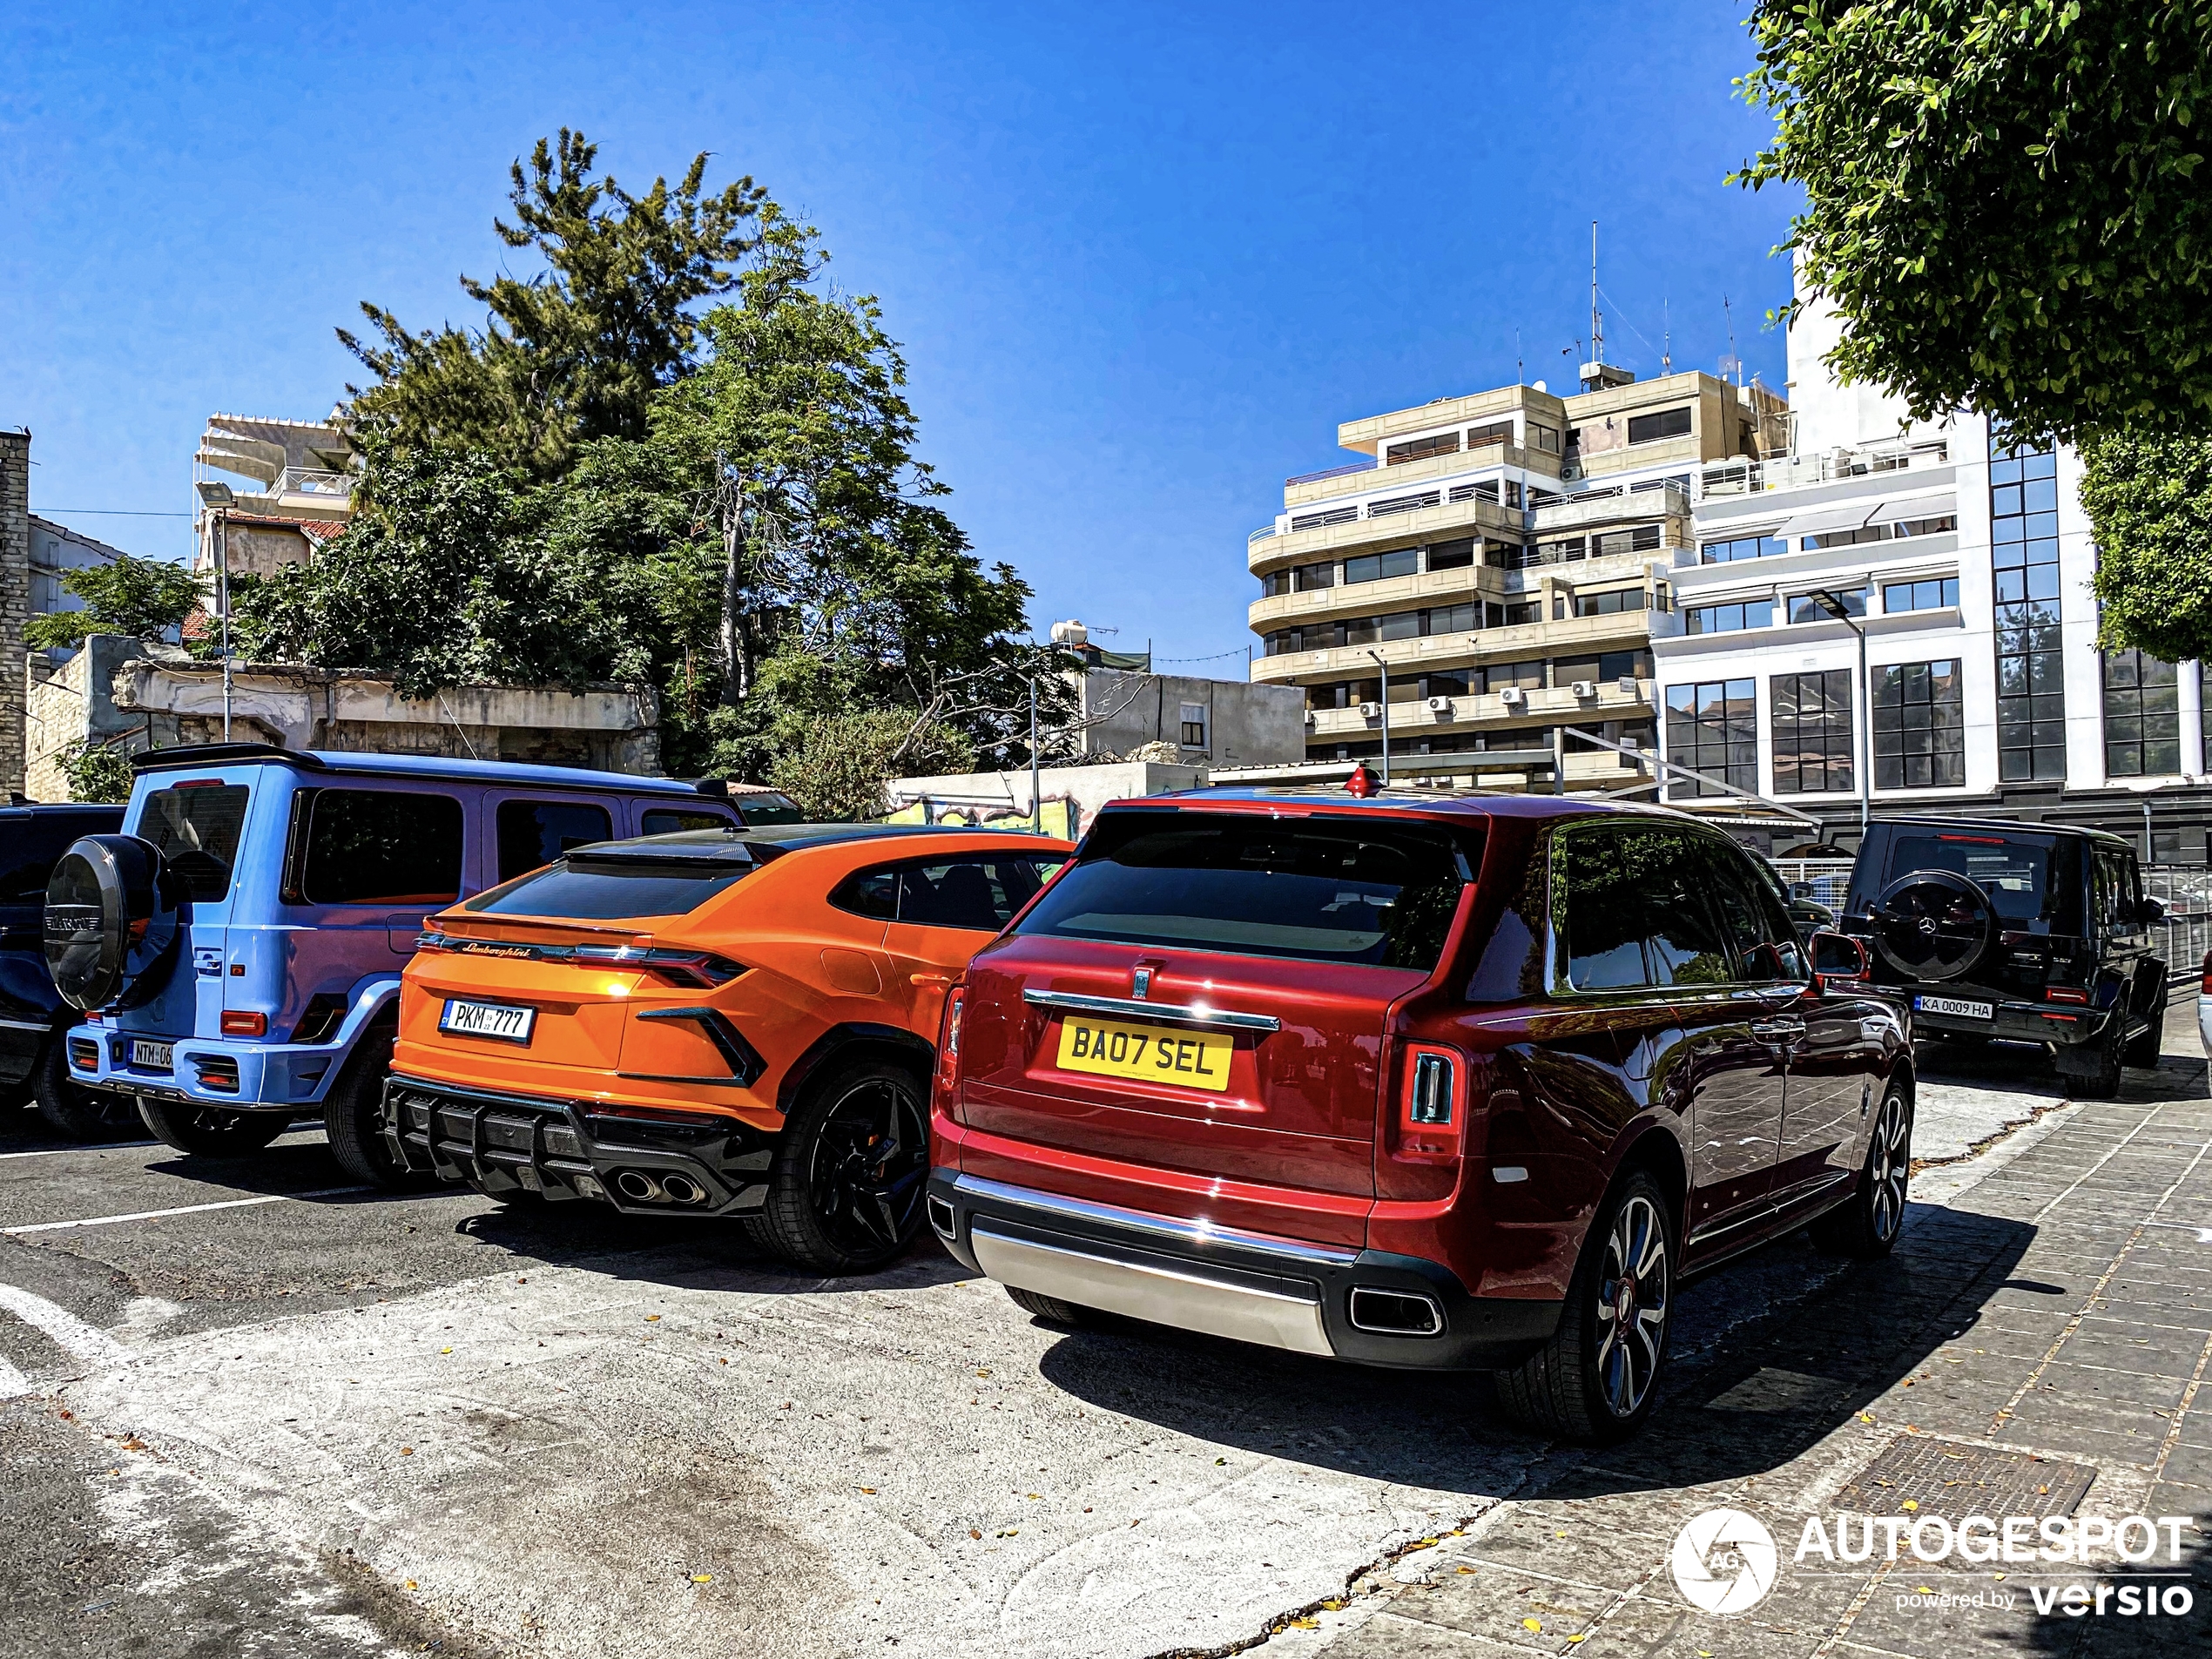 A cool luxury SUV trio shows up in Limassol.